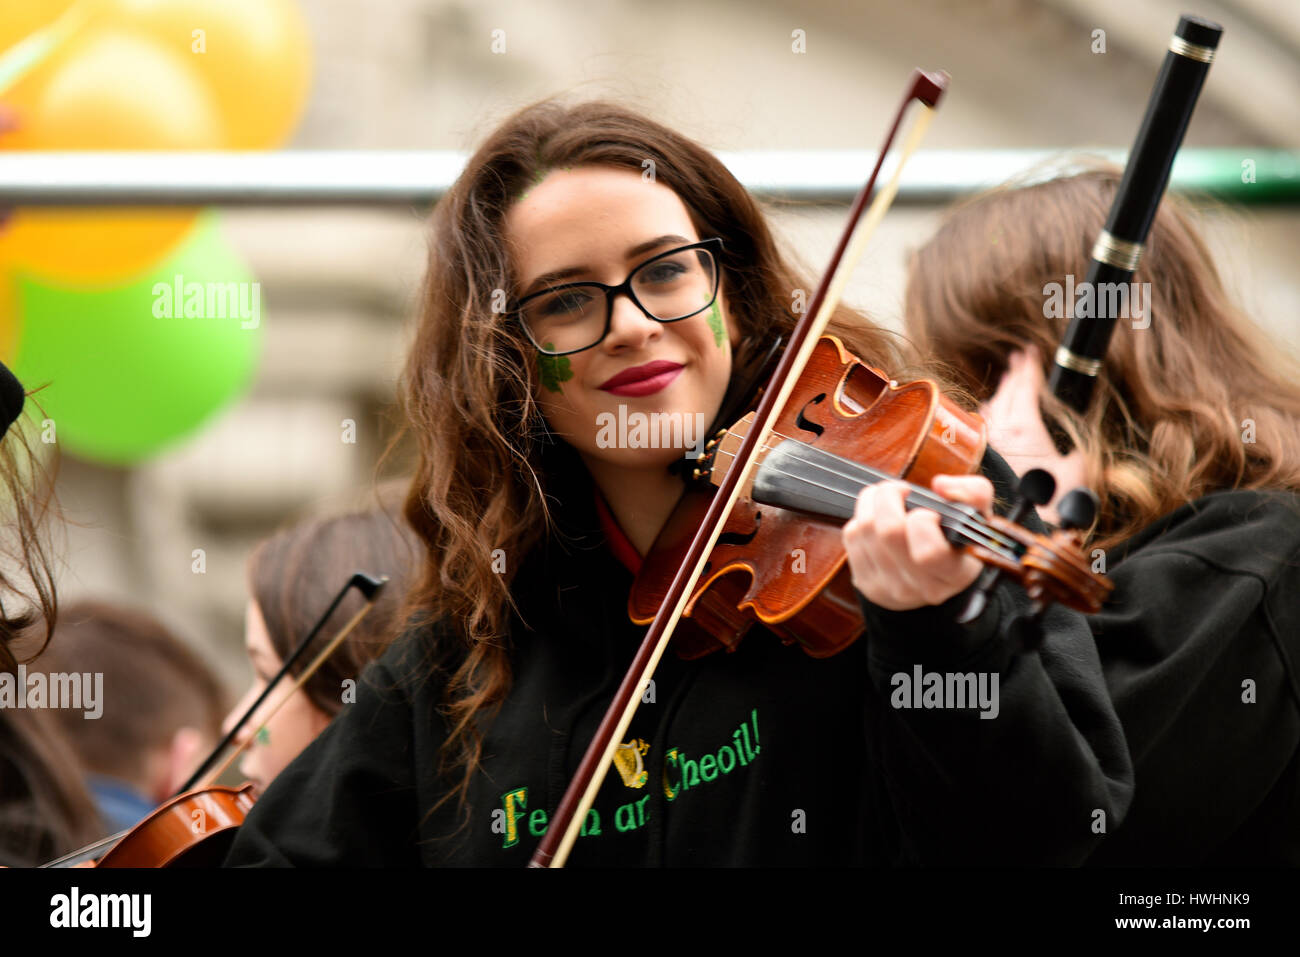 Violinist of the Feith an Cheoil School of Music at the 2017 St. Patrick's Day Parade in London Stock Photo